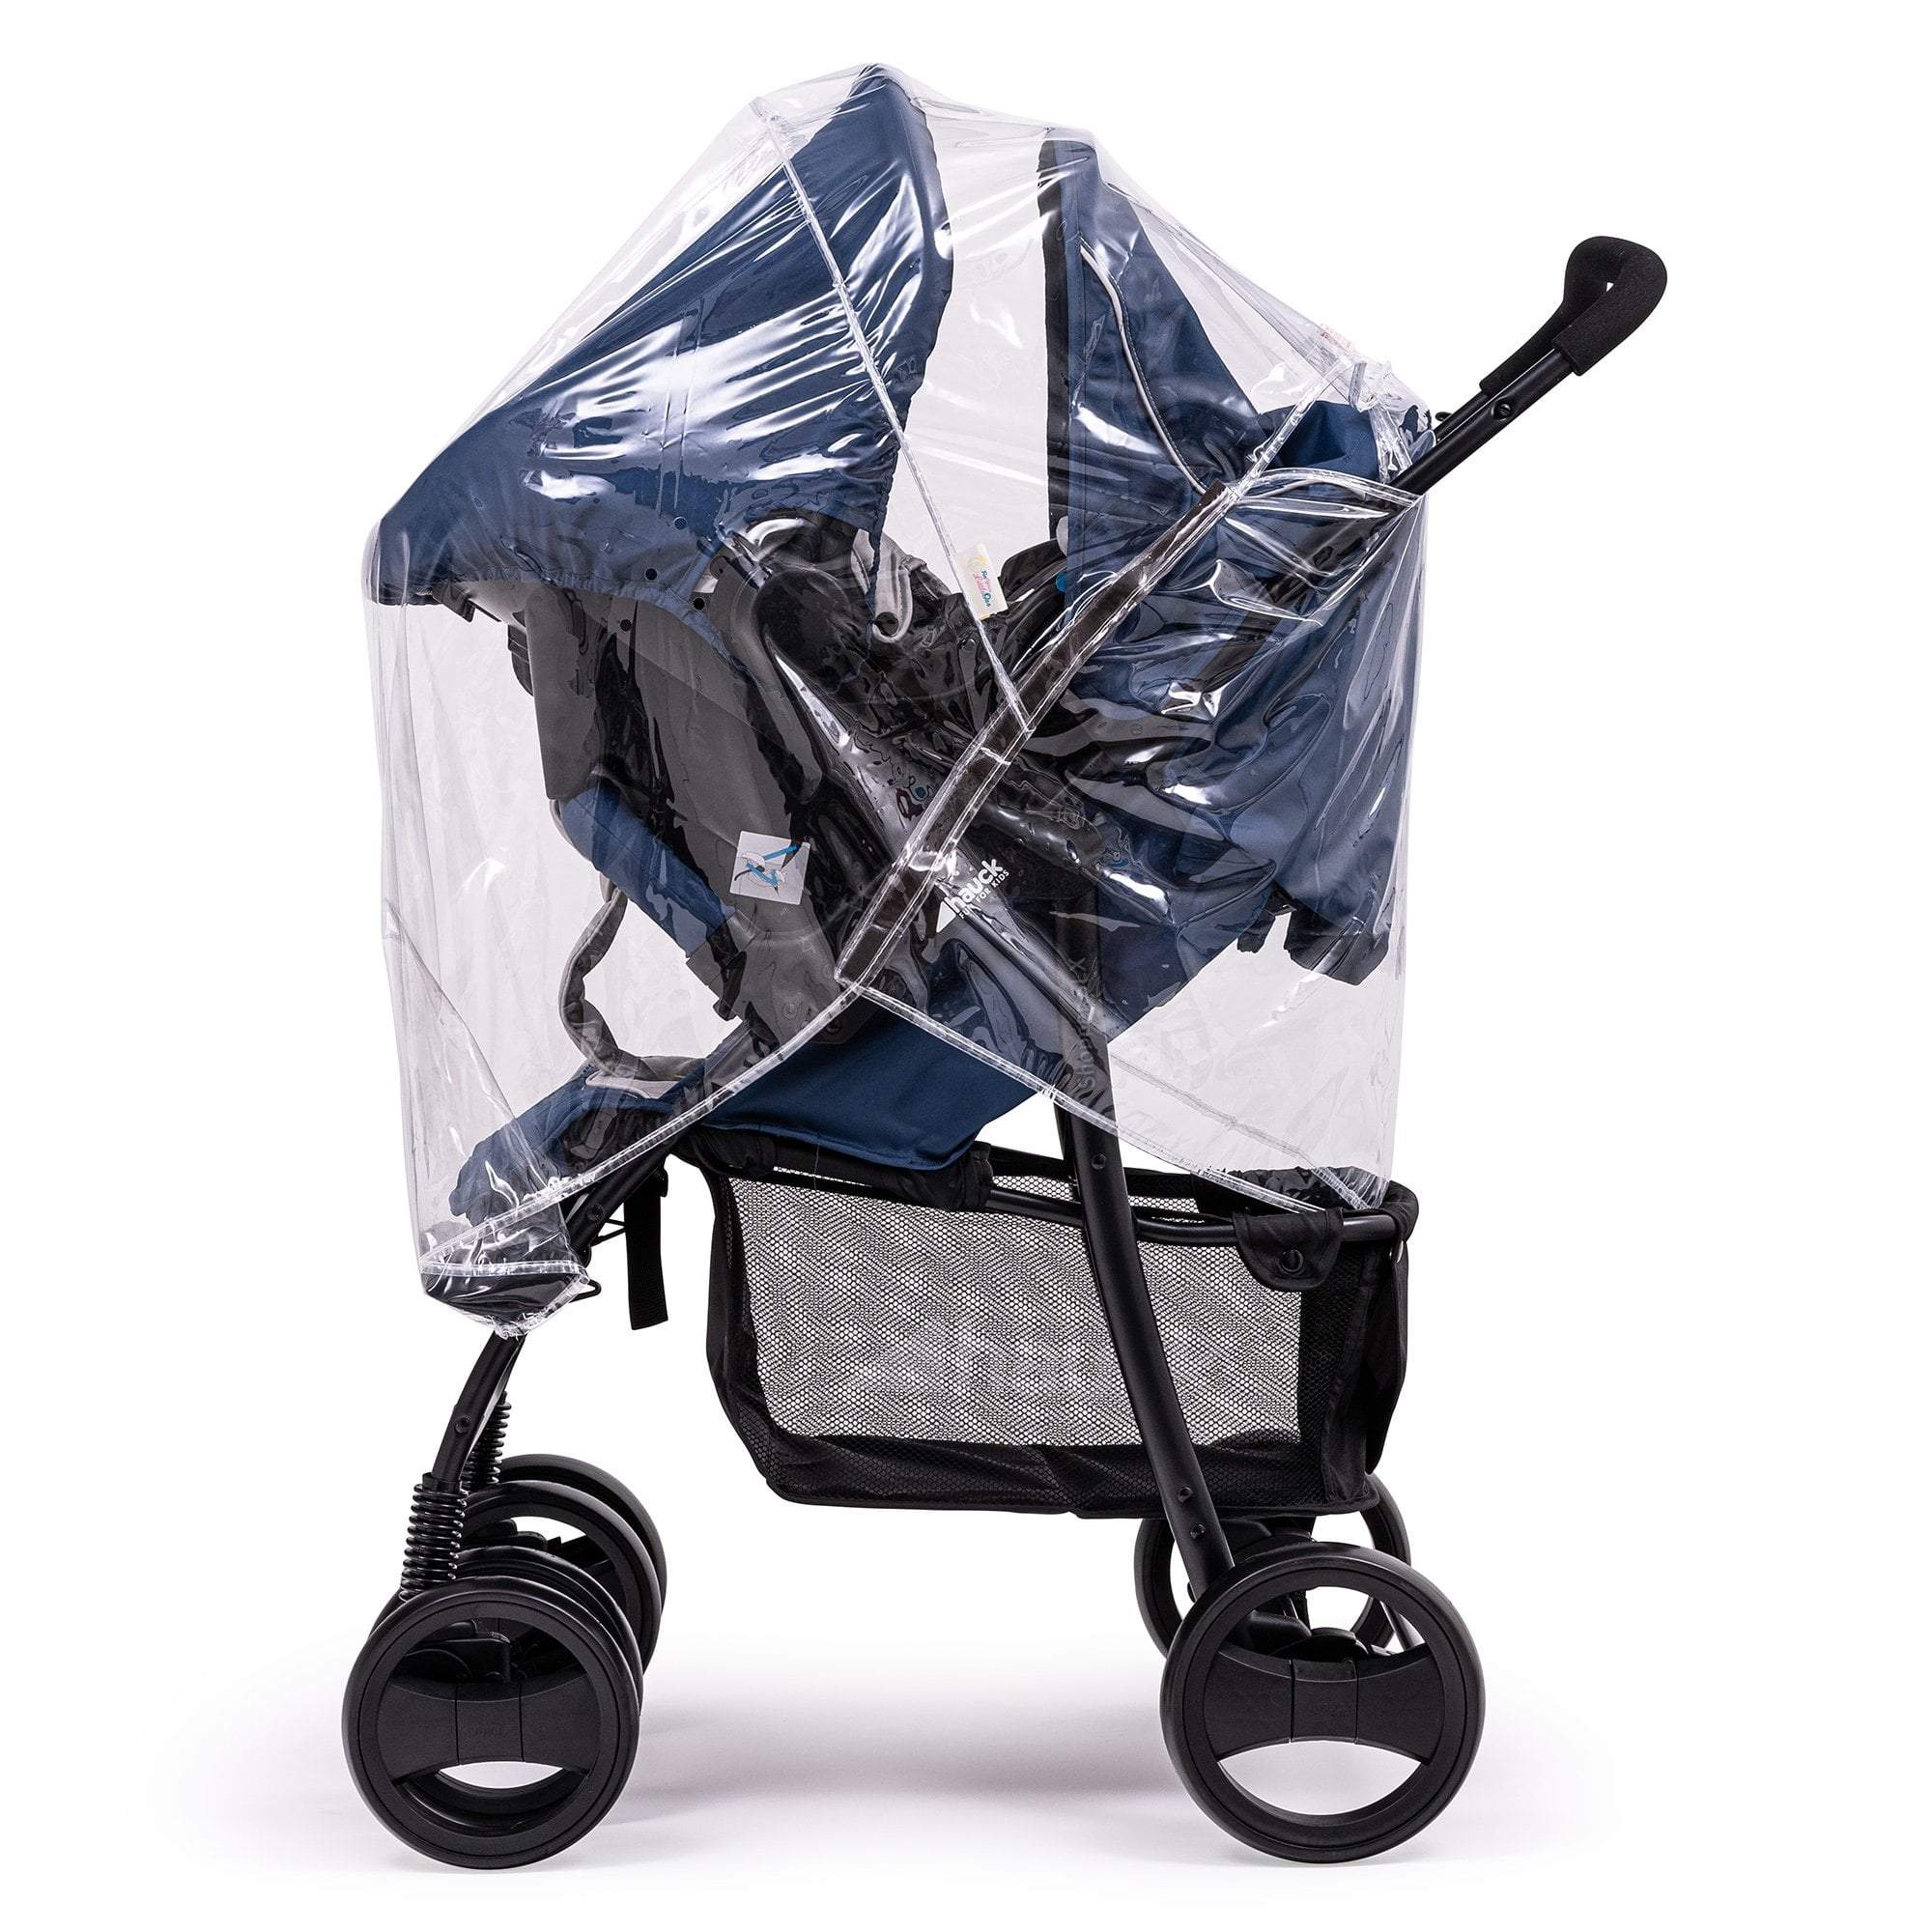 Travel System Raincover Compatible with Brio - Fits All Models - For Your Little One